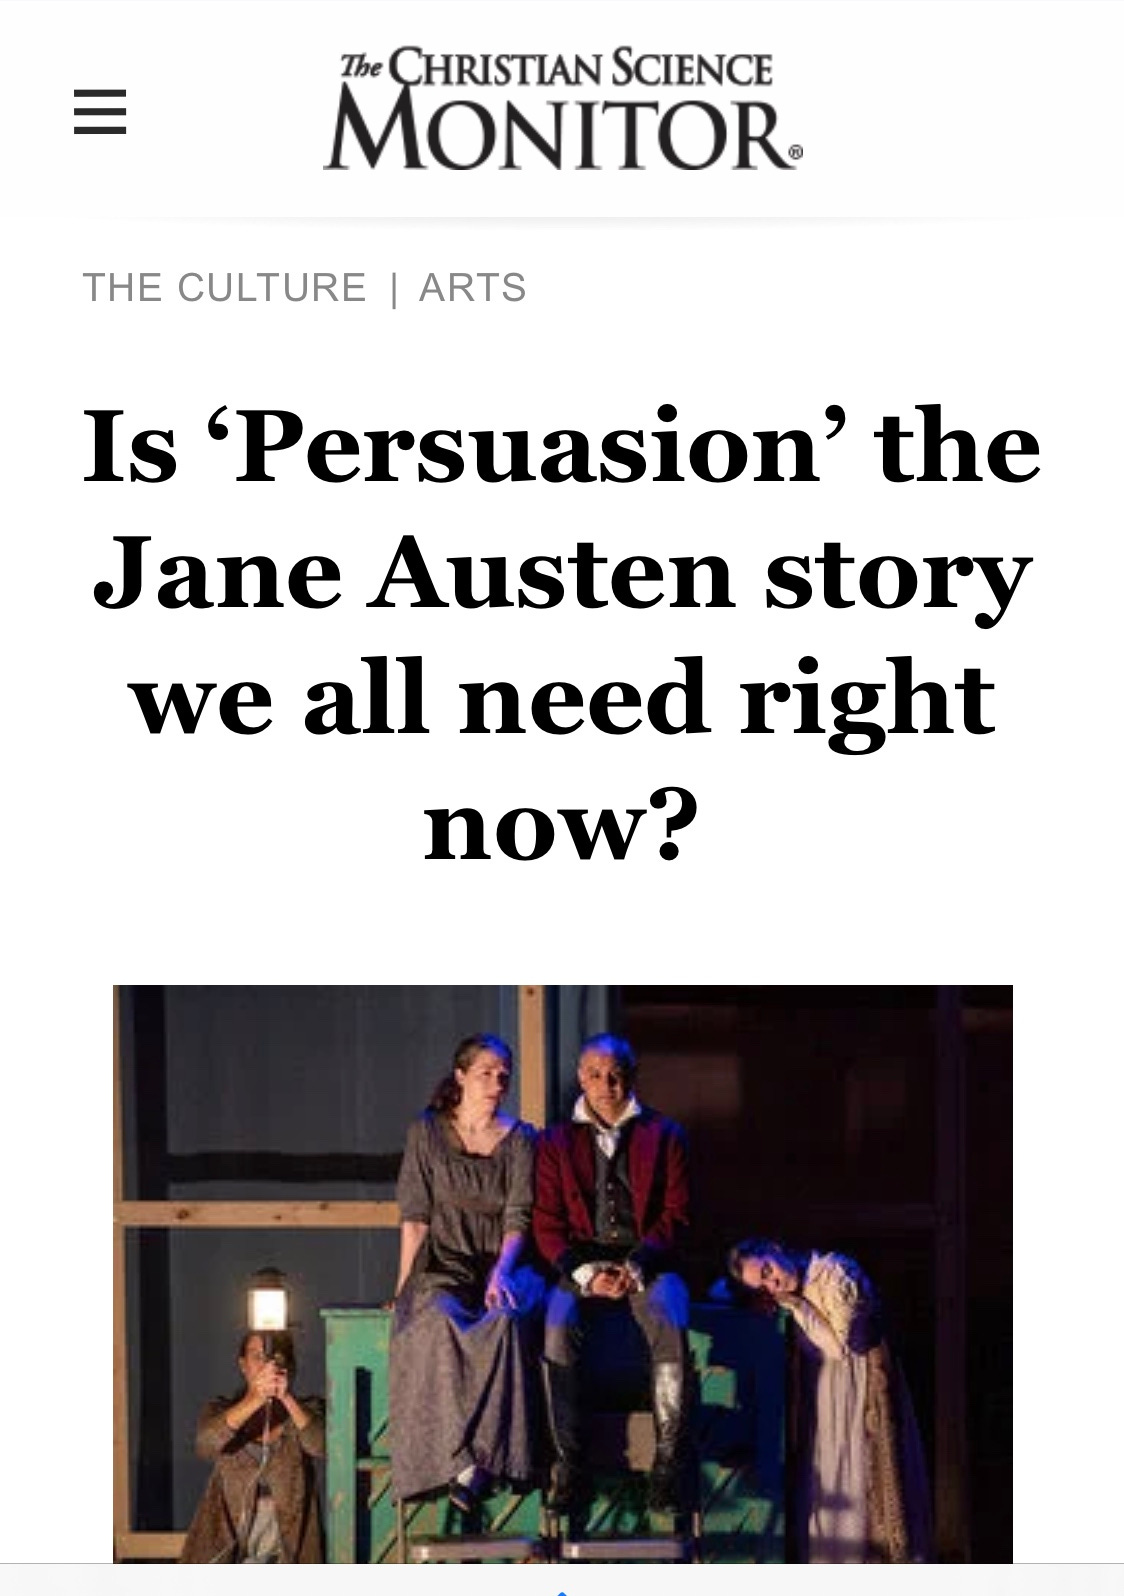 Playwright Sarah Rose Kearns is featured in this Christian Science Monitor piece about adapting this classic Jane Austen story for the stage. We also spoke with writer and educator Damianne Scott. The photo featured here is by Ashley Garrett, courtesy of Bedlam 